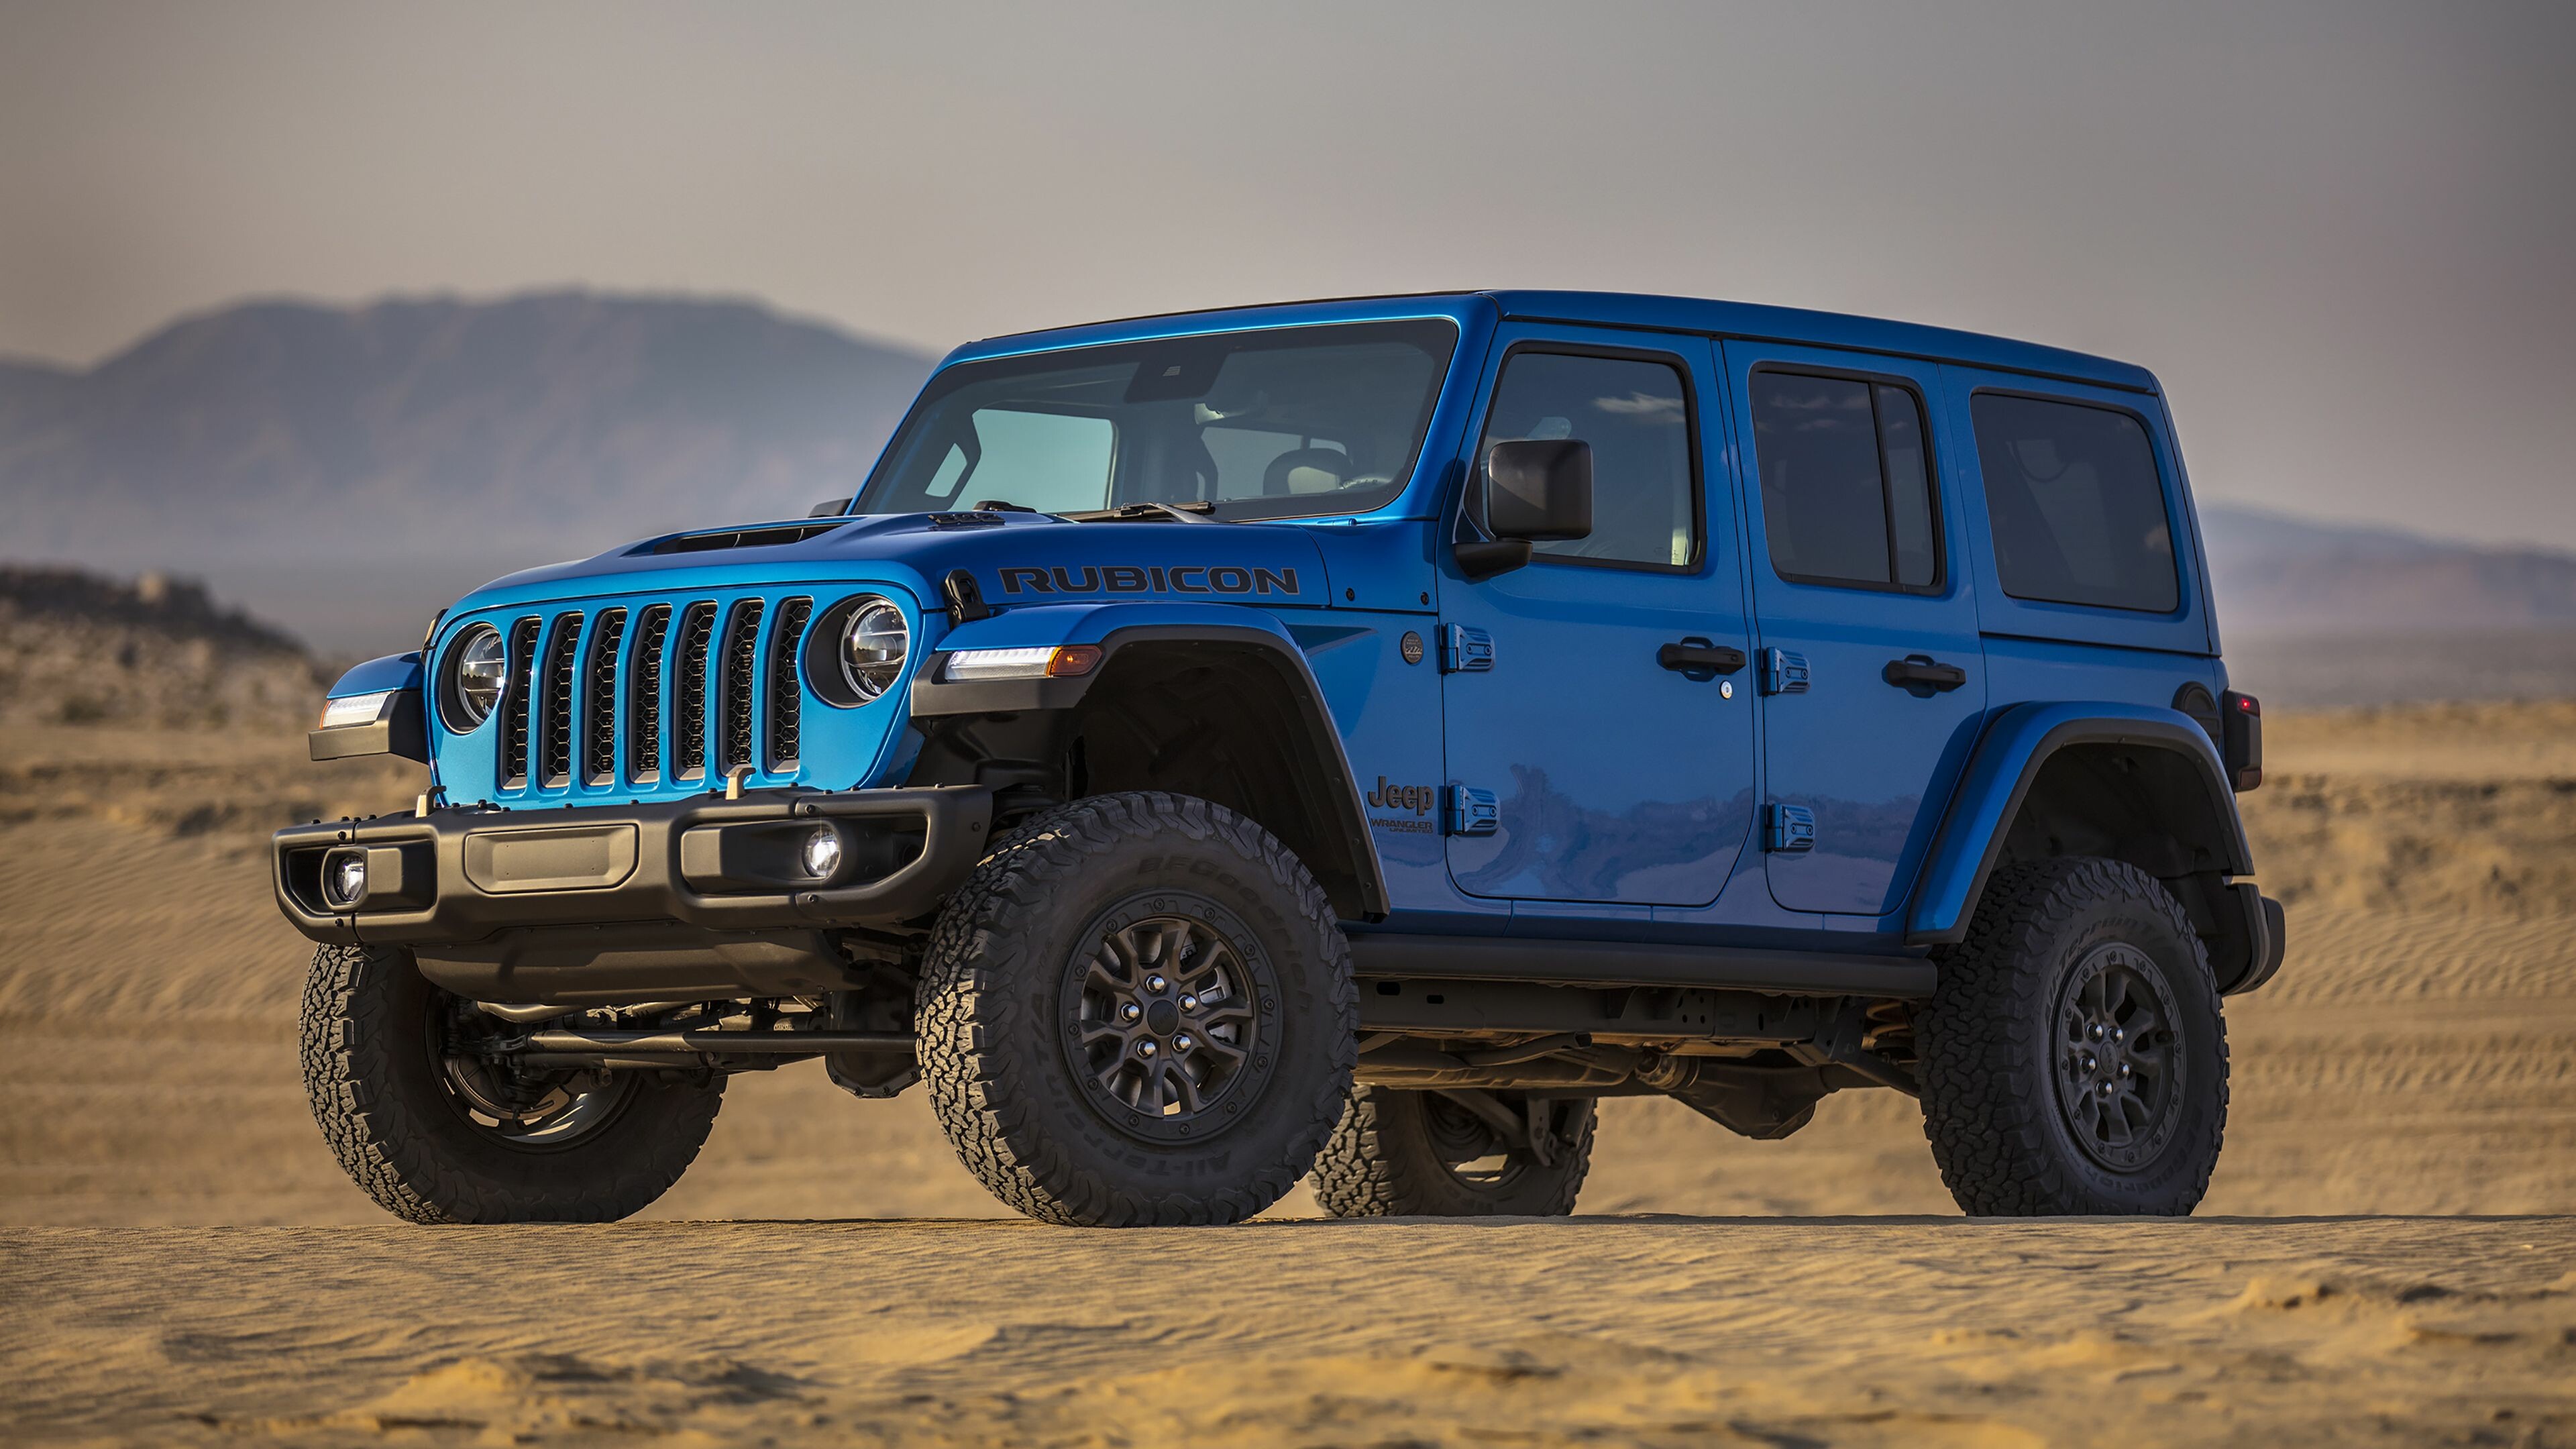 Jeep: In 2021, a hybrid modification of the Wrangler 4xe was introduced, capable of traveling more than 50 km on electric power alone. 3840x2160 4K Background.